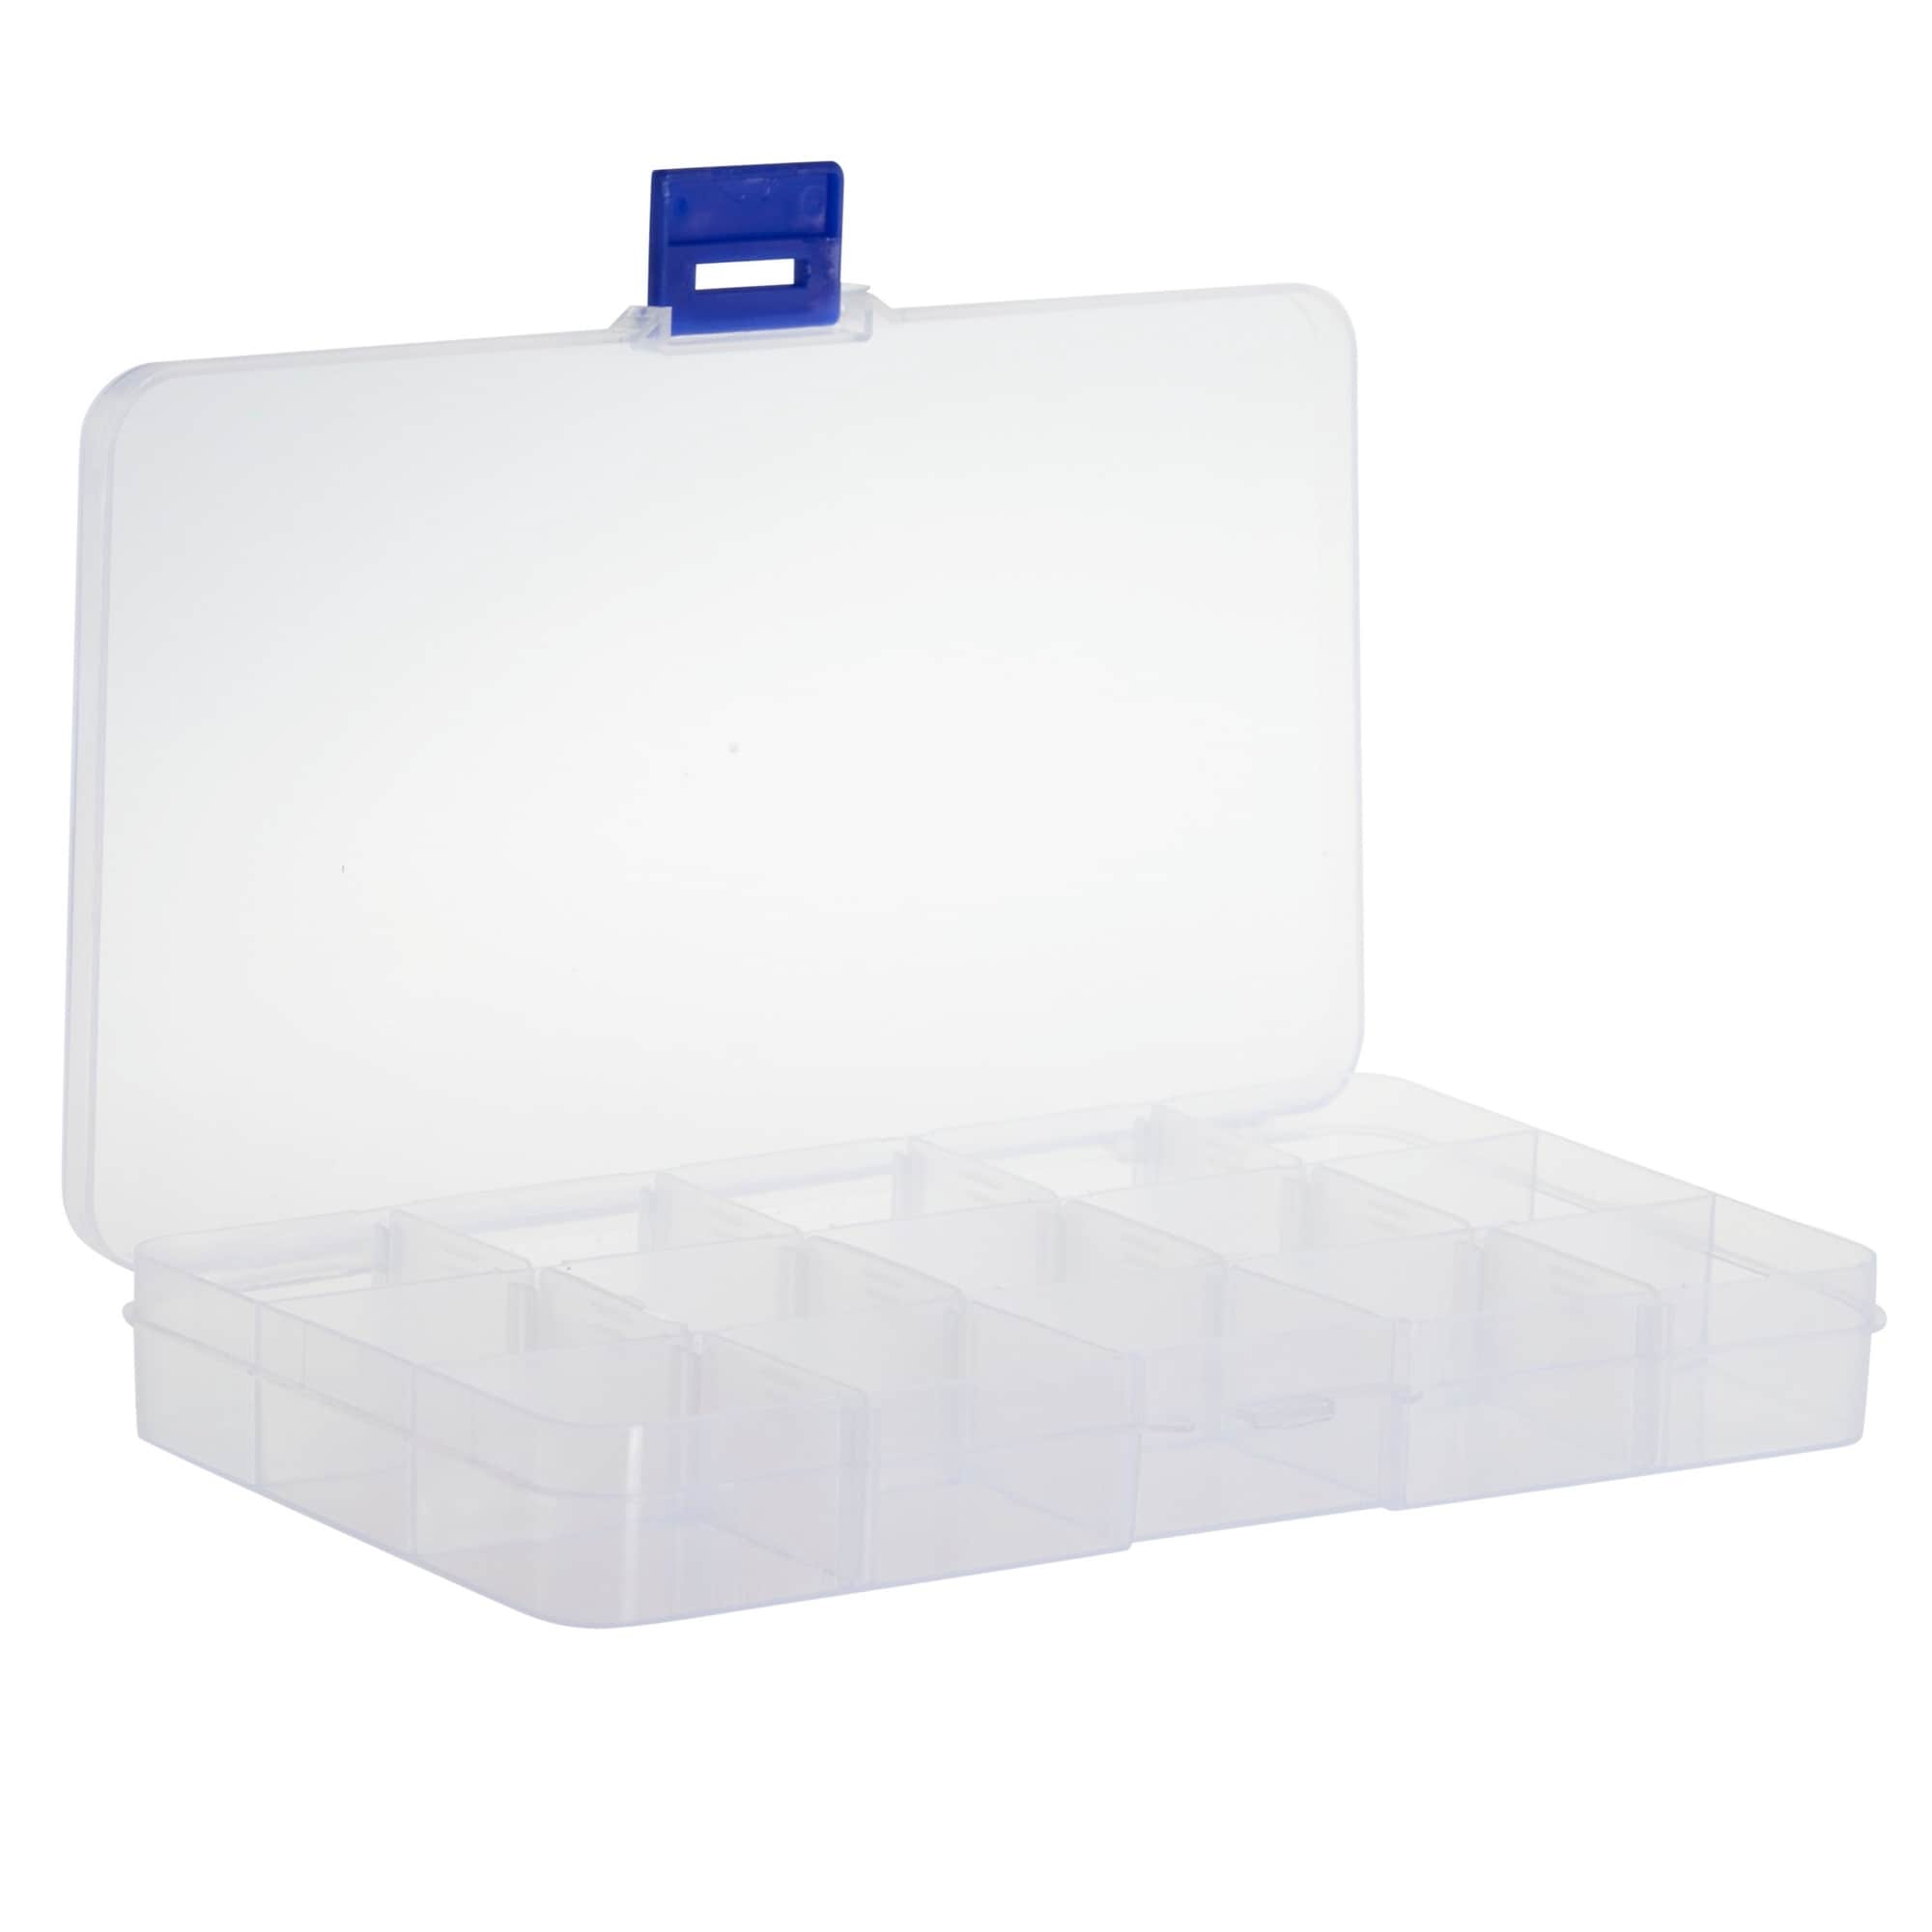 6 Pack Plastic Jewelry Organizer Box with Labels and Dividers for Custom Organization (7 x 4 x 1 in)